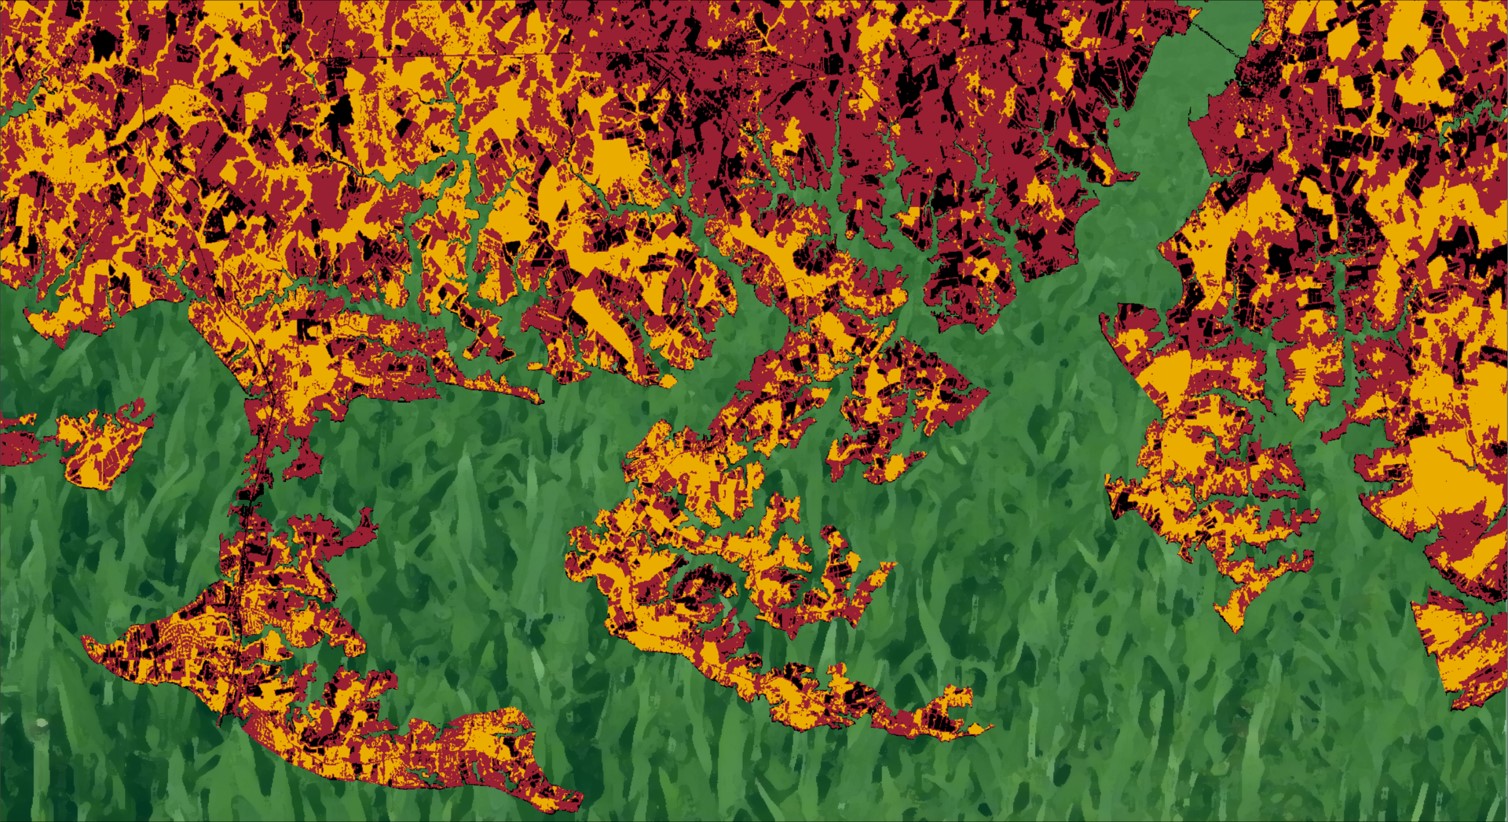 Imagery displaying Normalized Difference Vegetation Index (NDVI) values calculated from 2018 Landsat 8 OLI data and cropped to a subset of Eastern Maryland bordering the Chesapeake Bay. Black areas correspond to regions of low vegetation density, red to medium vegetation density, and yellow to high vegetation density. Within agricultural regions, low NDVI may indicate areas in which local stakeholders could commit additional resources. Water has been replaced with a stylized cover crop image (green).